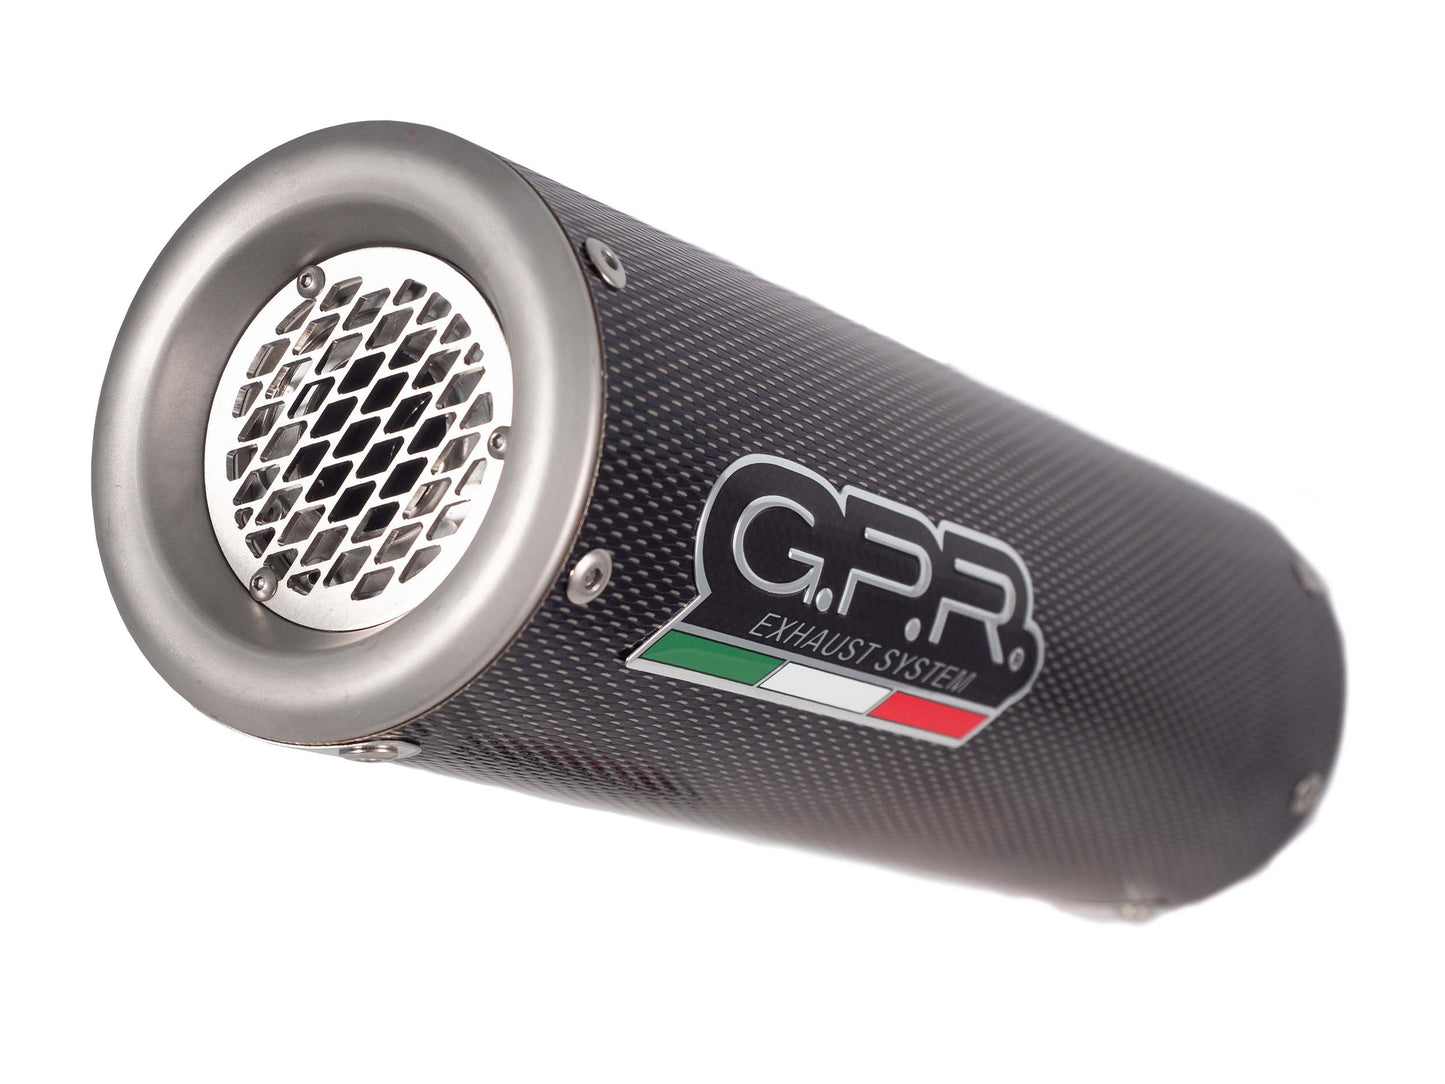 GPR Exhaust for Aprilia Rsv4 1000 - RF - Rr - Racer Pack 2015-2016, M3 Poppy , Slip-on Exhaust Including Removable DB Killer and Link Pipe